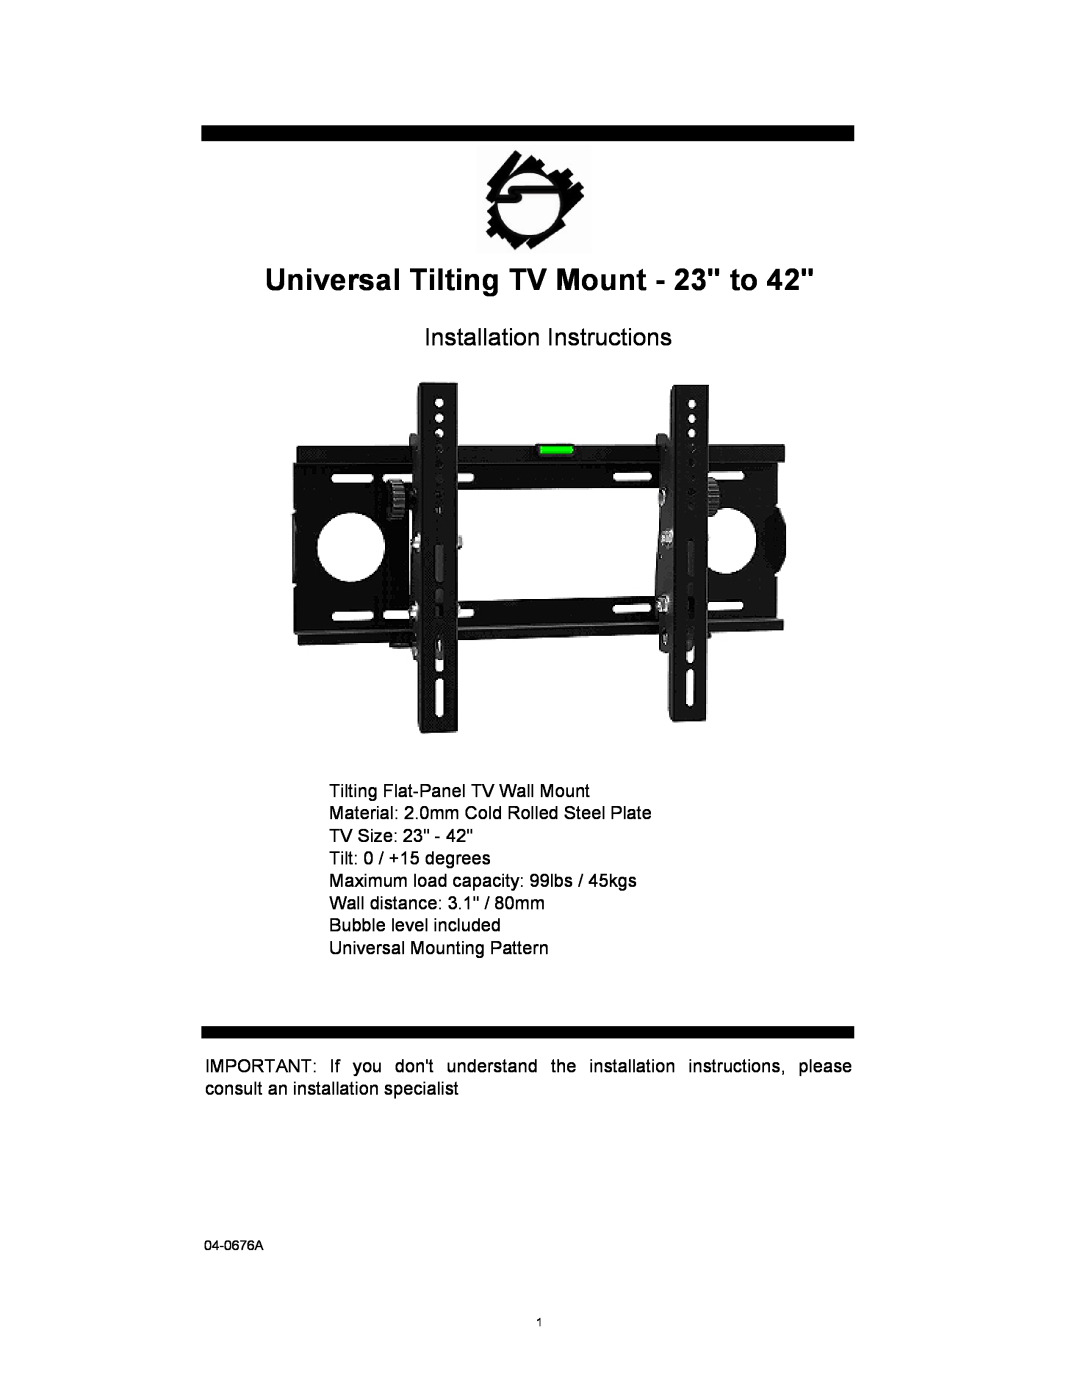 SIIG 04-0676A installation instructions Tilting Flat-Panel TV Wall Mount, Wall distance 3.1 / 80mm Bubble level included 